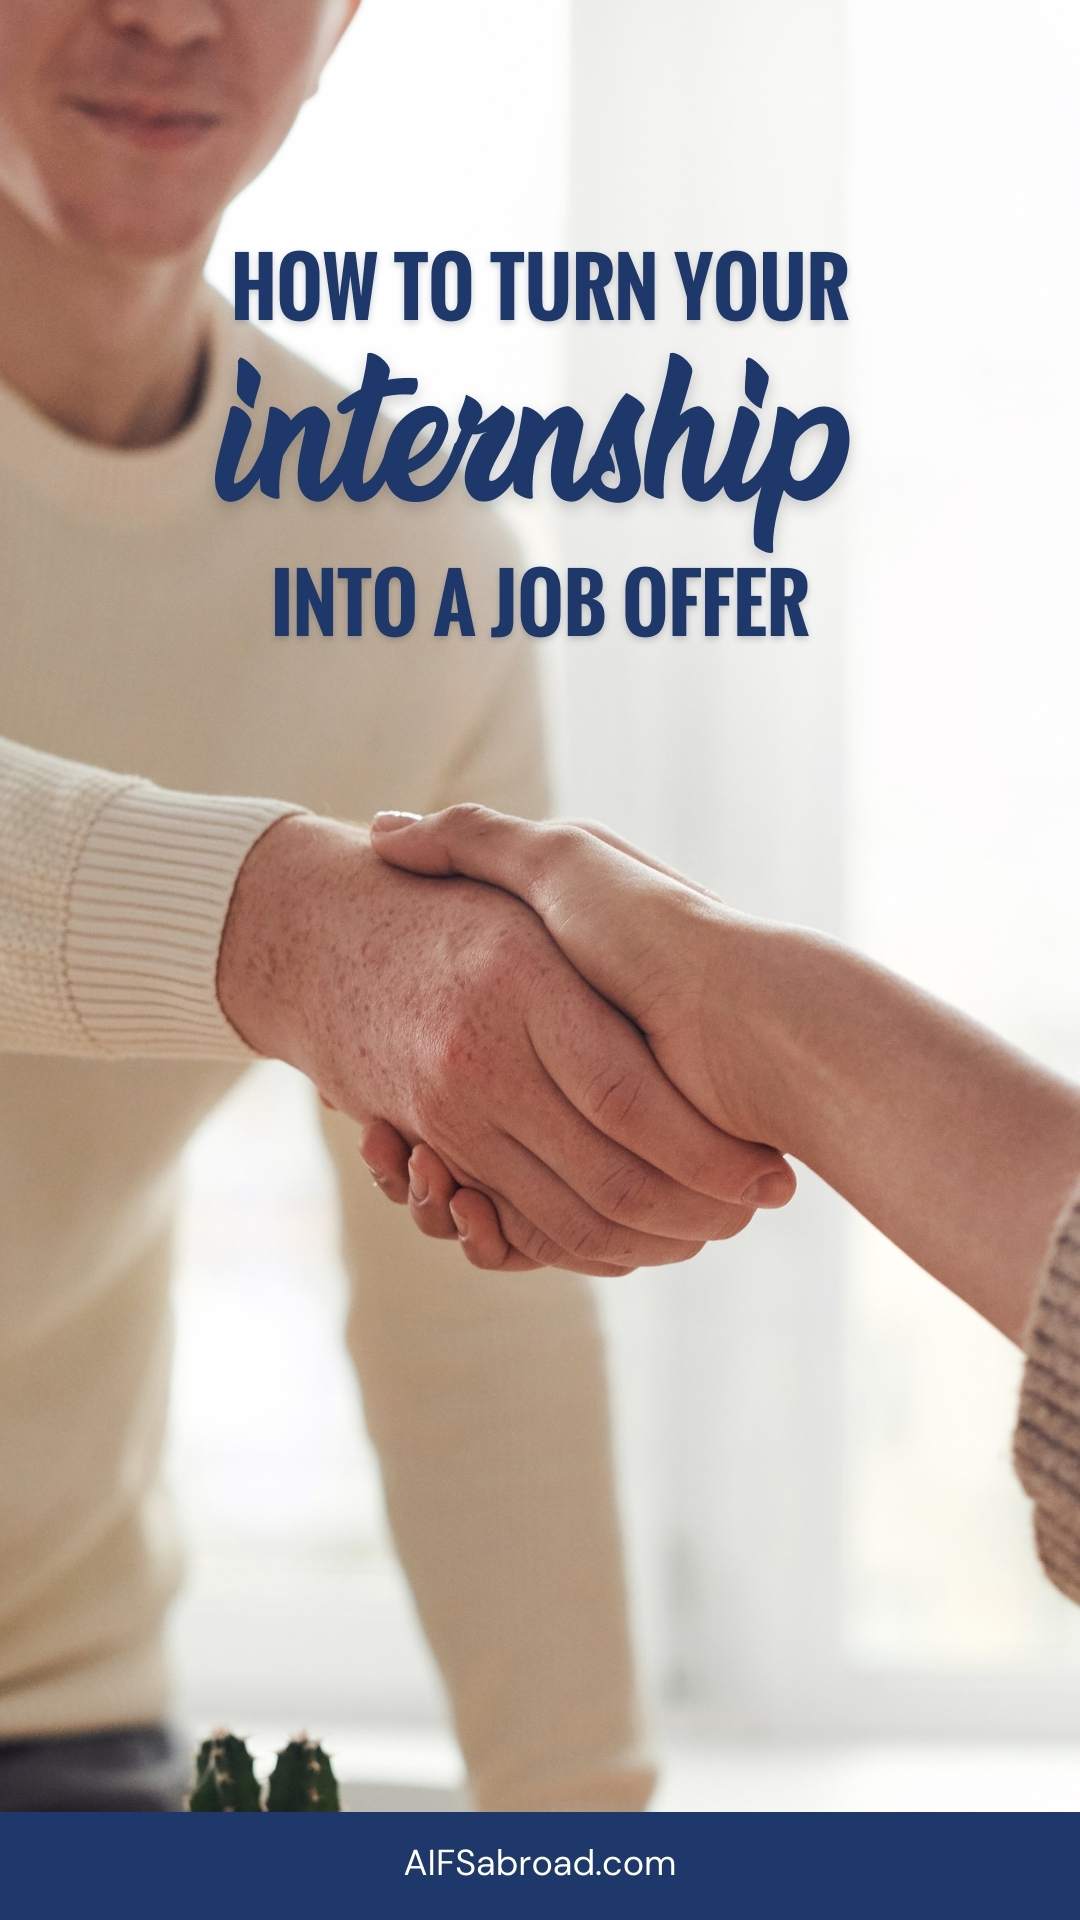 Pin image: Two people shaking hands with text saying "How to Turn Your Internship Into a Job Offer"